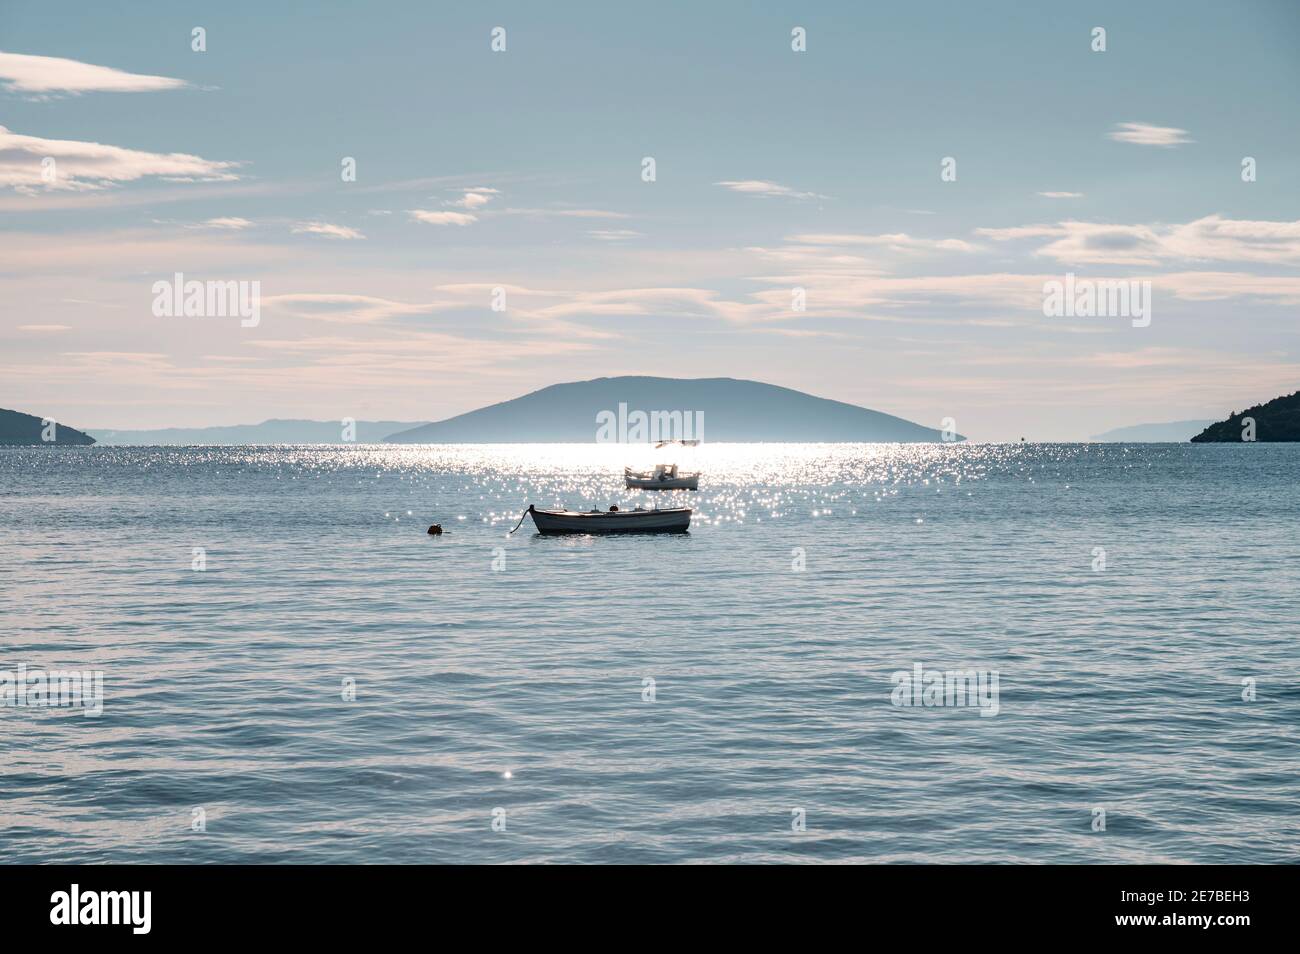 Fishing boats in the sea early in the morning Stock Photo